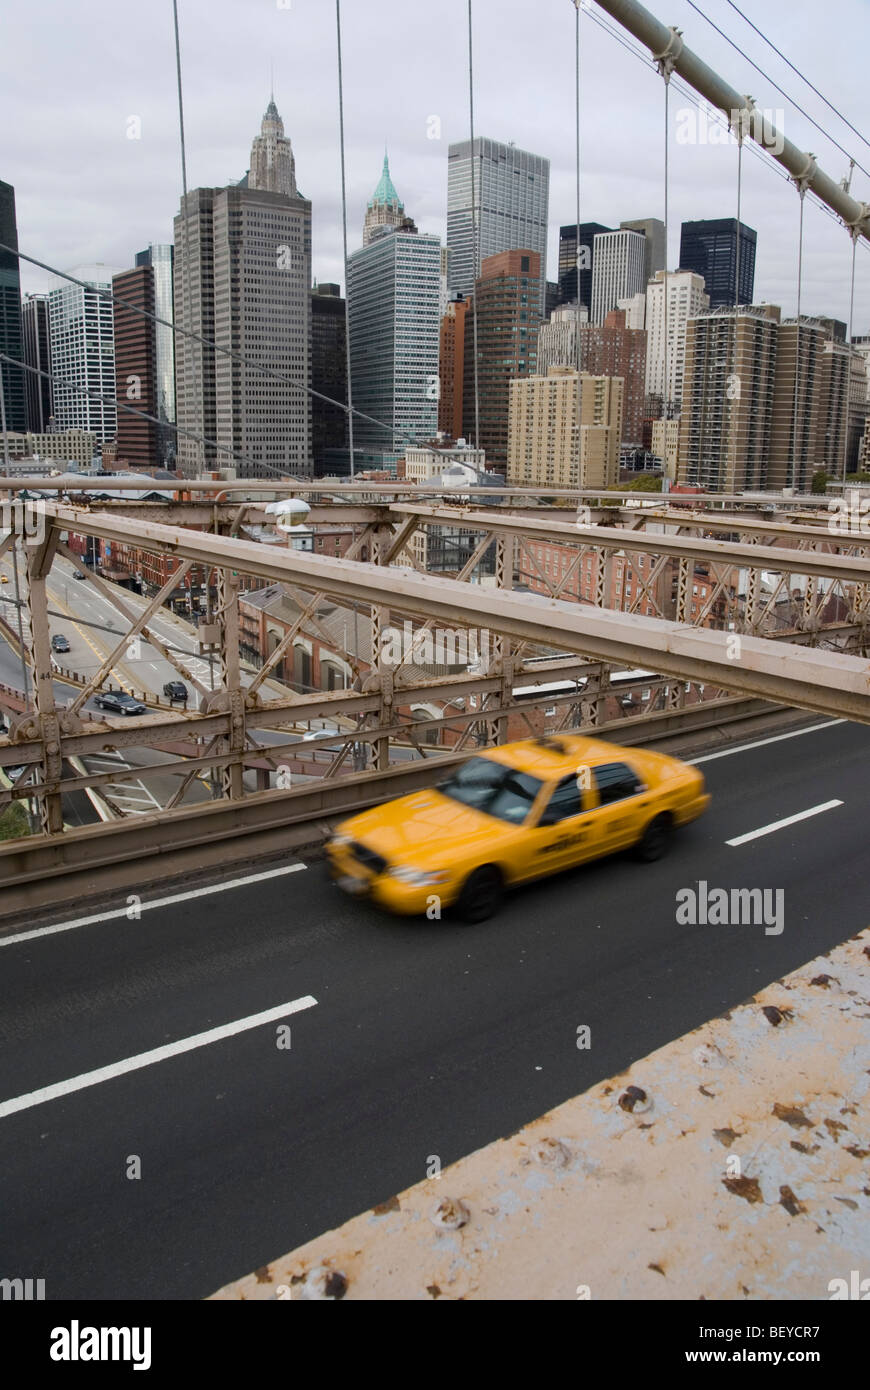 A yellow cab speeding over the Brooklyn Bridge, with the New York City skyline in the background. Stock Photo